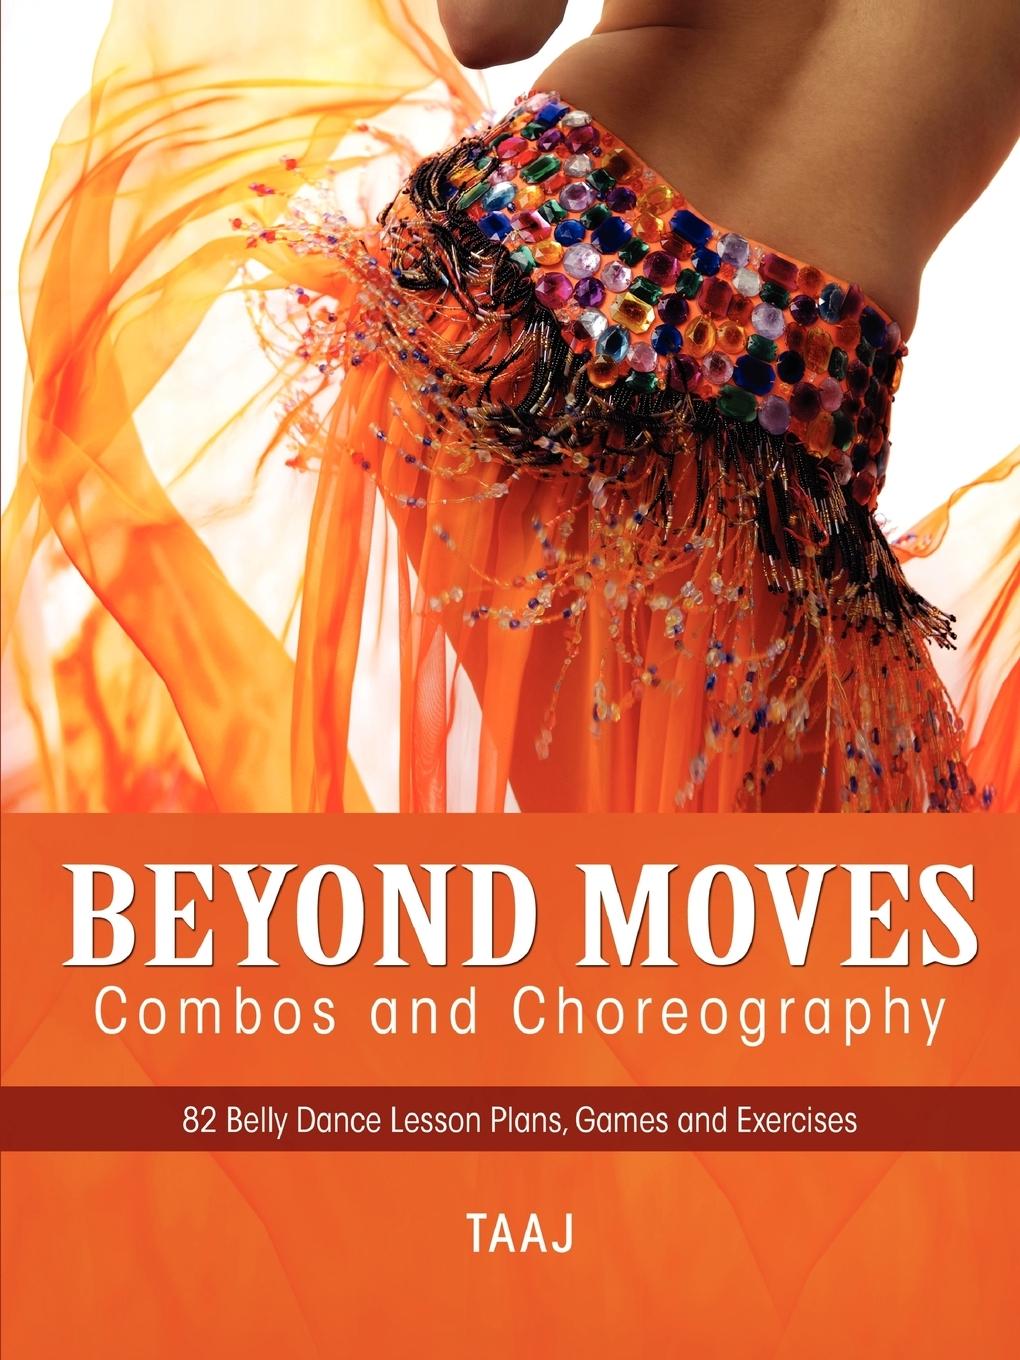 Belly Dance Beyond Moves, Combos, and Choreography 82 Lesson Plans, Games, and Exercises to Make Your Classes Fun, Productive and Profitable - Taaj